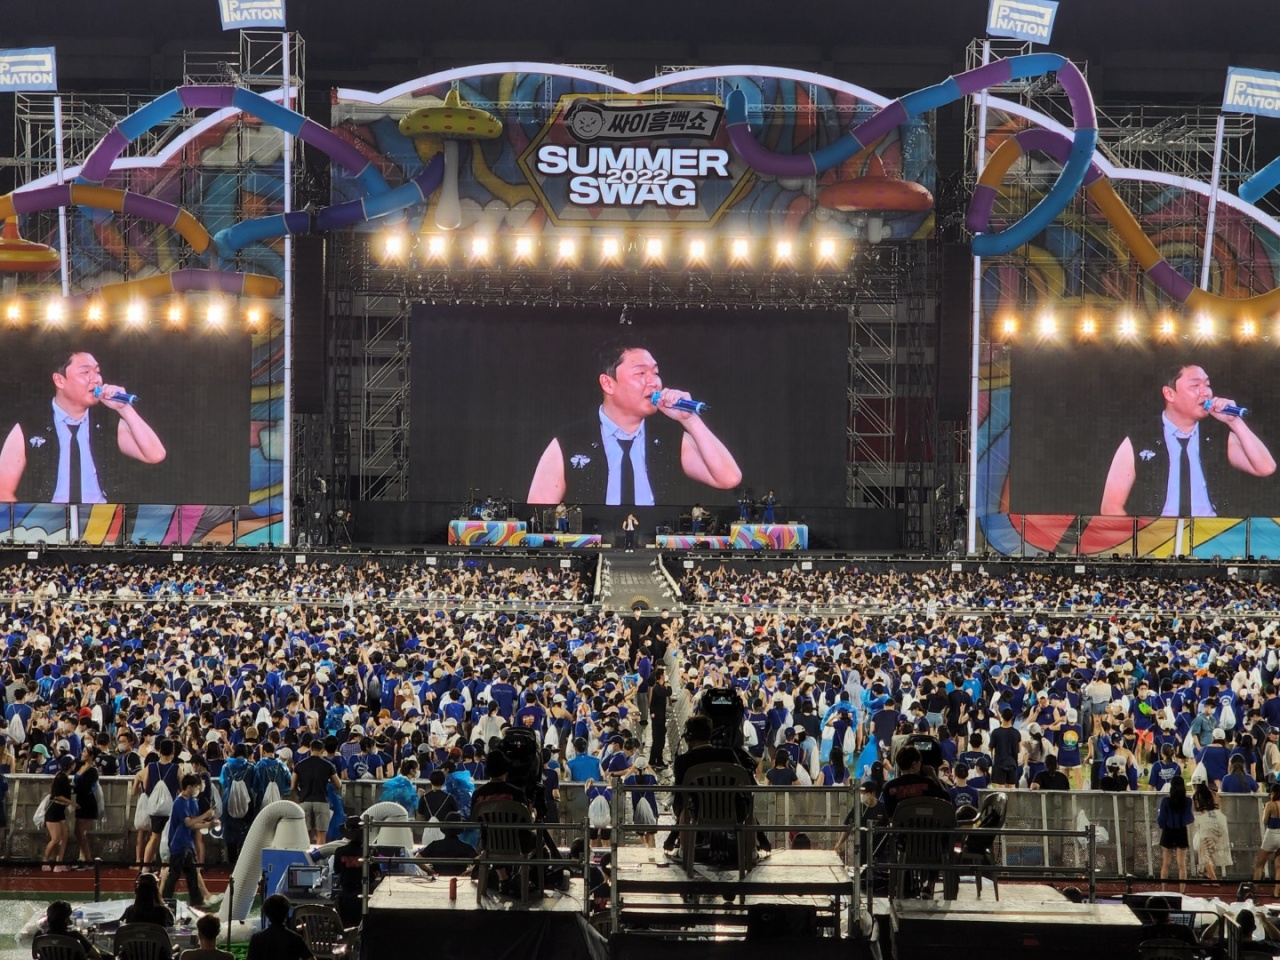 Psy performs on stage at Psy’s “Summer Swag 2022” concert, held at Jamsil Olympic Stadium in Seoul on Sunday. (Jie Ye-eun/The Korea Herald)